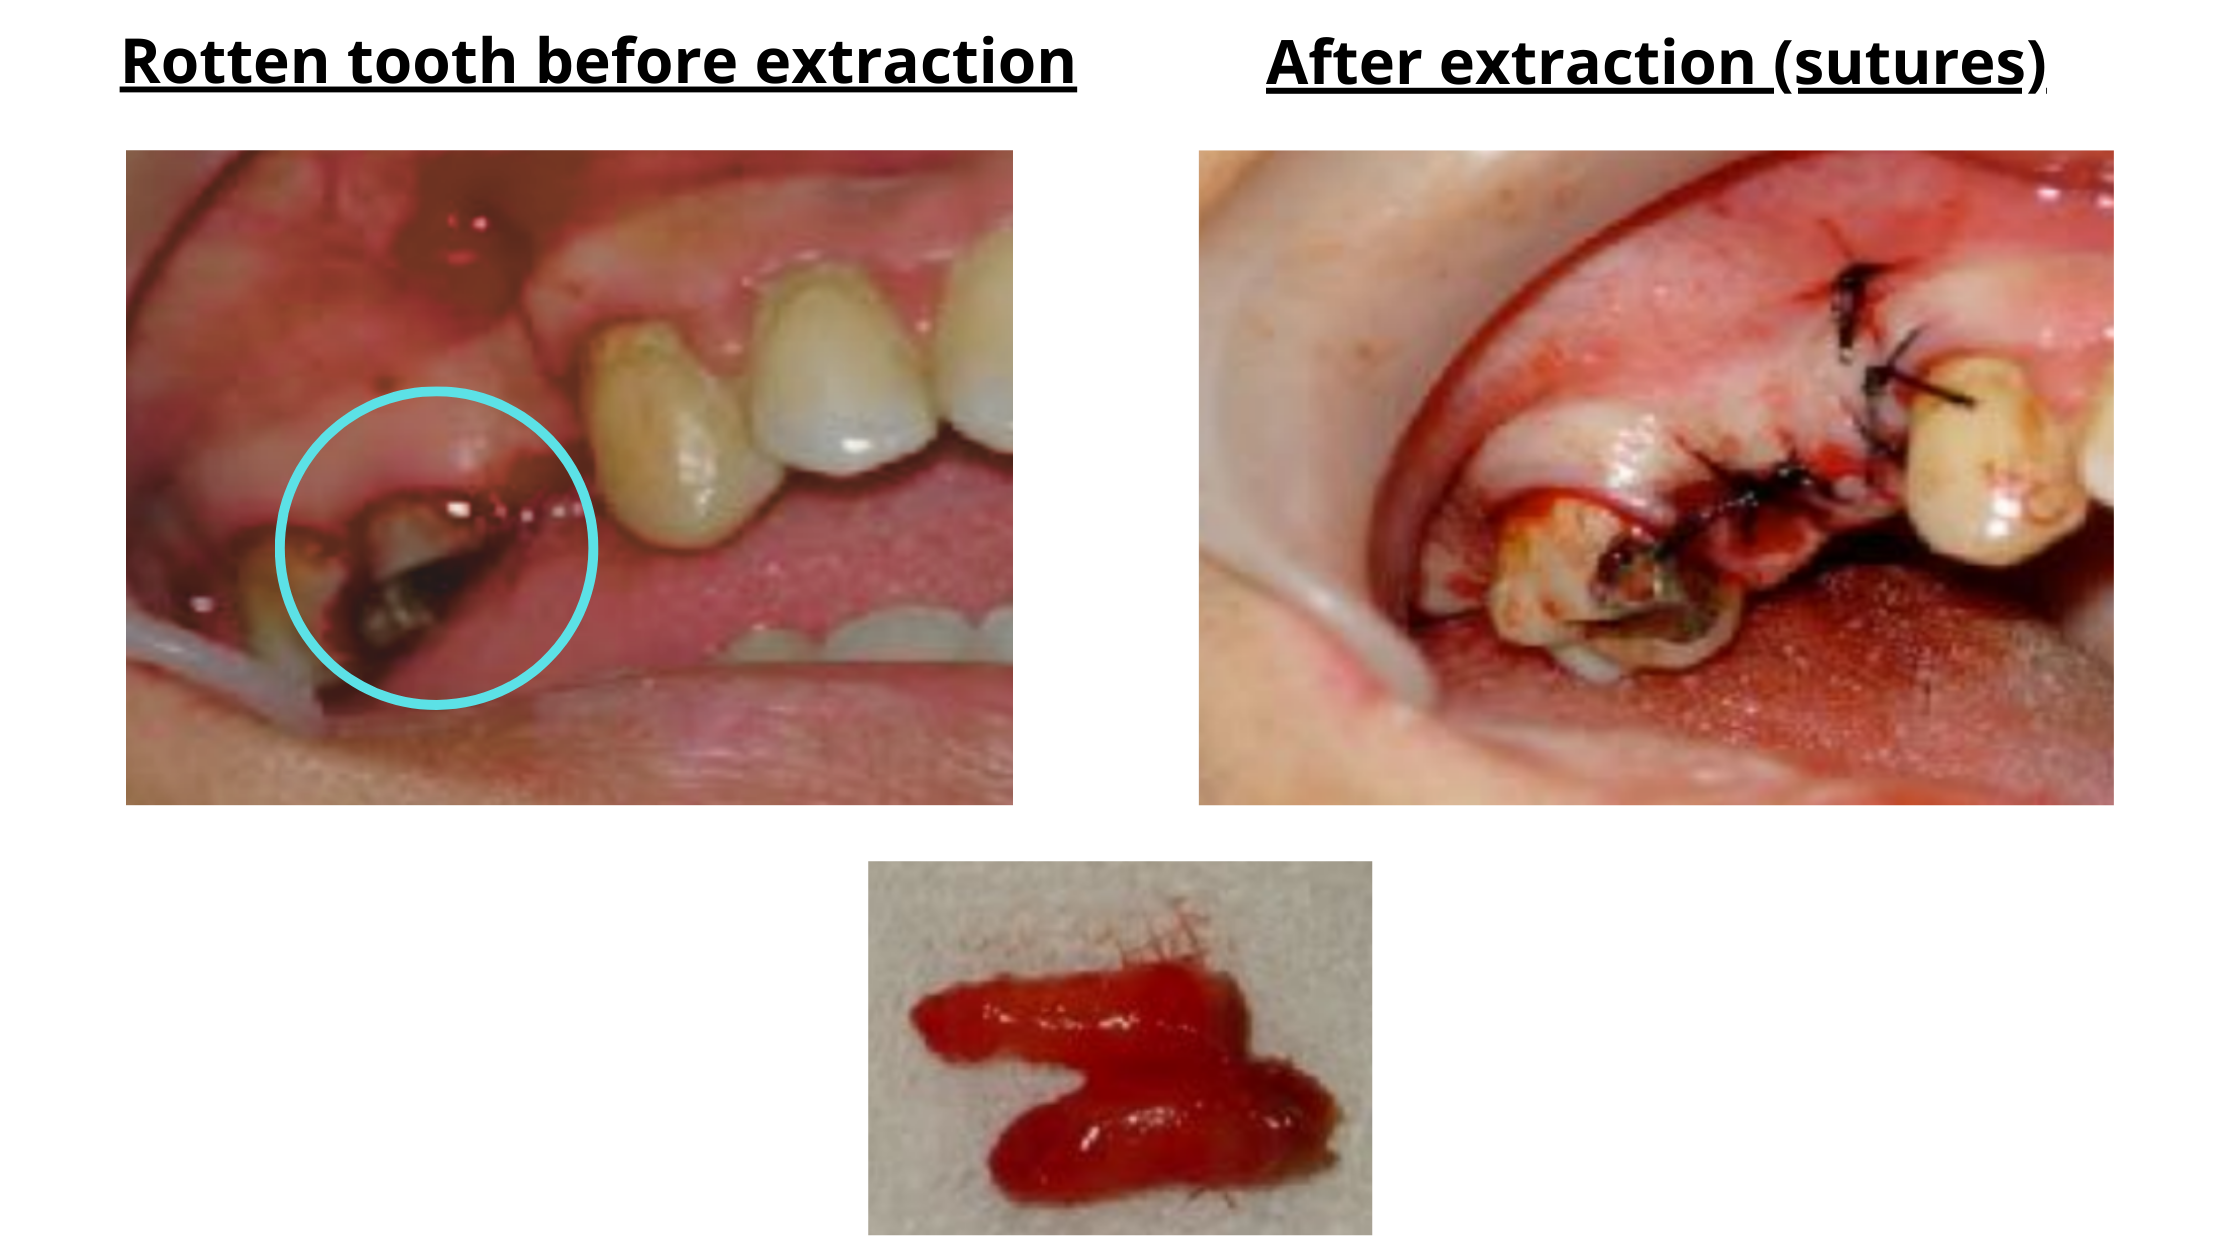 Clinical images of rotten tooth extraction by alveolectomy: Before and After